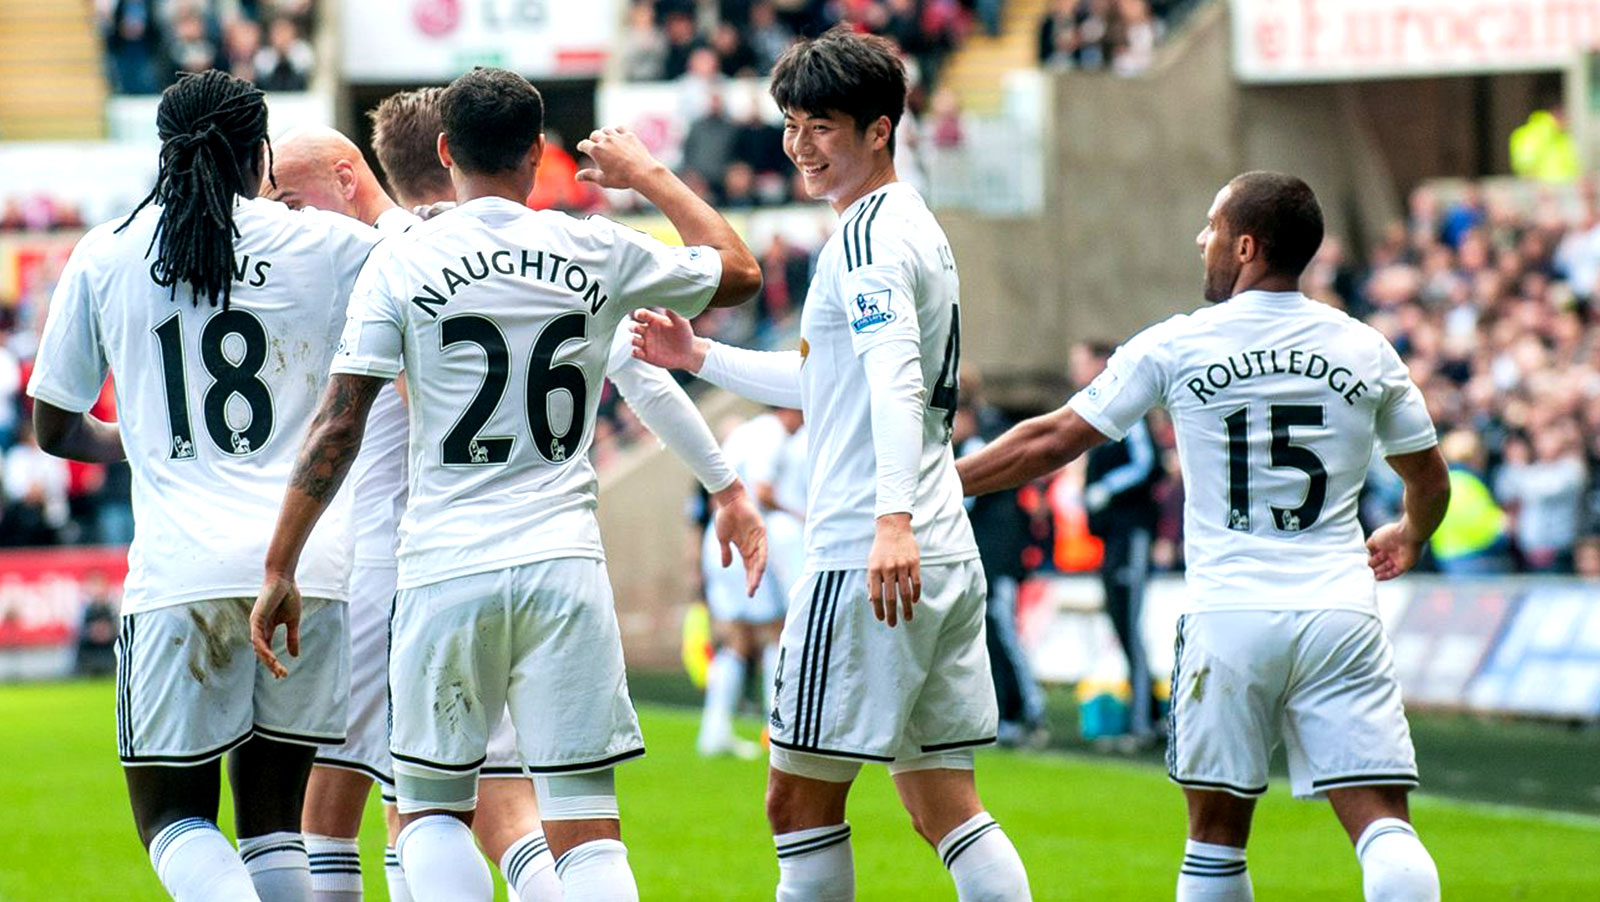 EPL Review Week 29: Swansea move above West Ham; time up for Pardew?